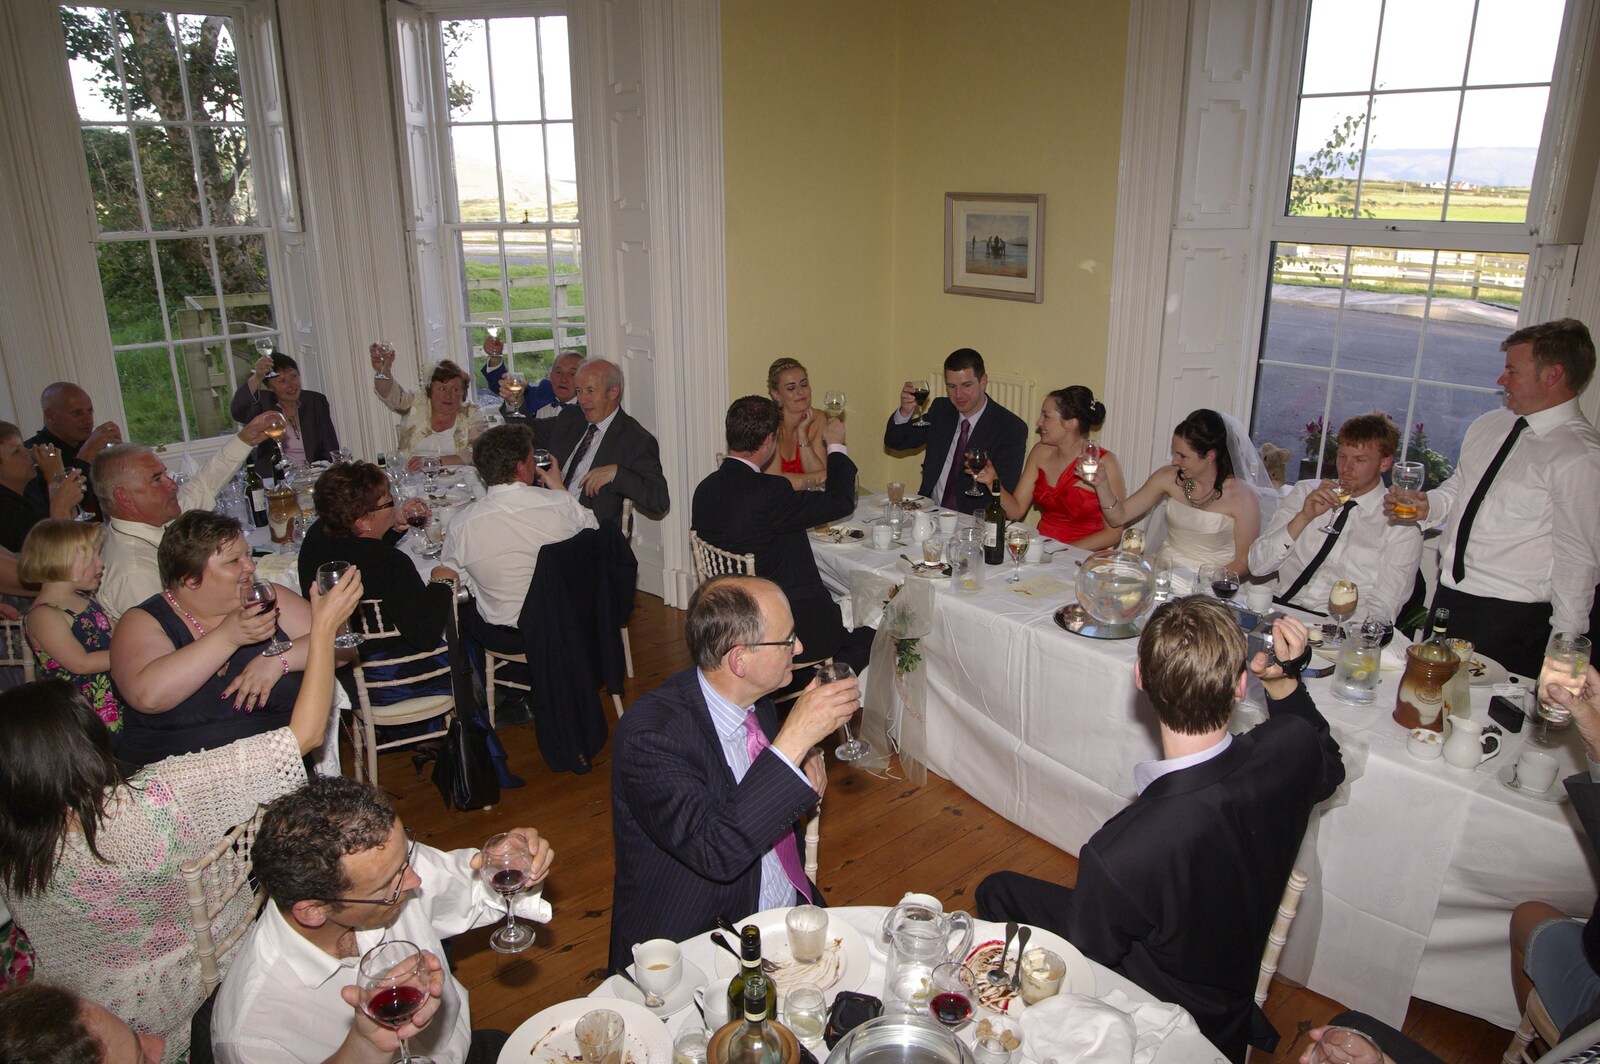 Another toast from Julie and Cameron's Wedding, Ballintaggart House, Dingle - 24th July 2009